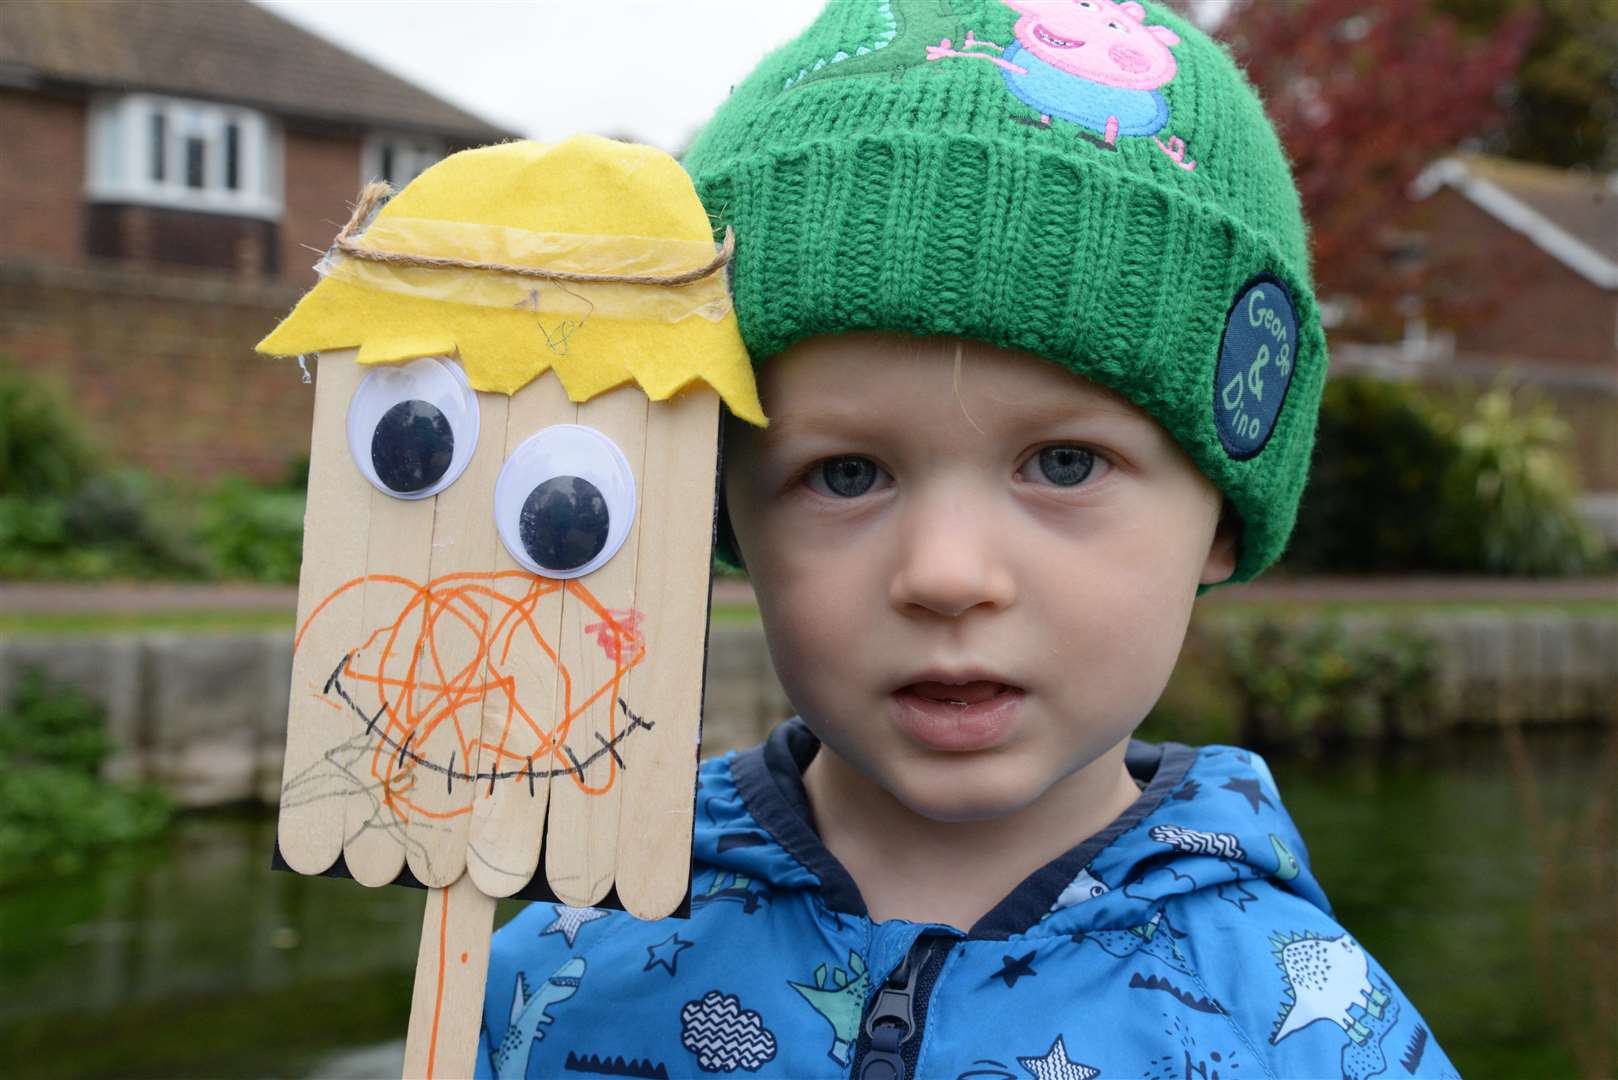 Make your own scarecrow crafts from £2 per person